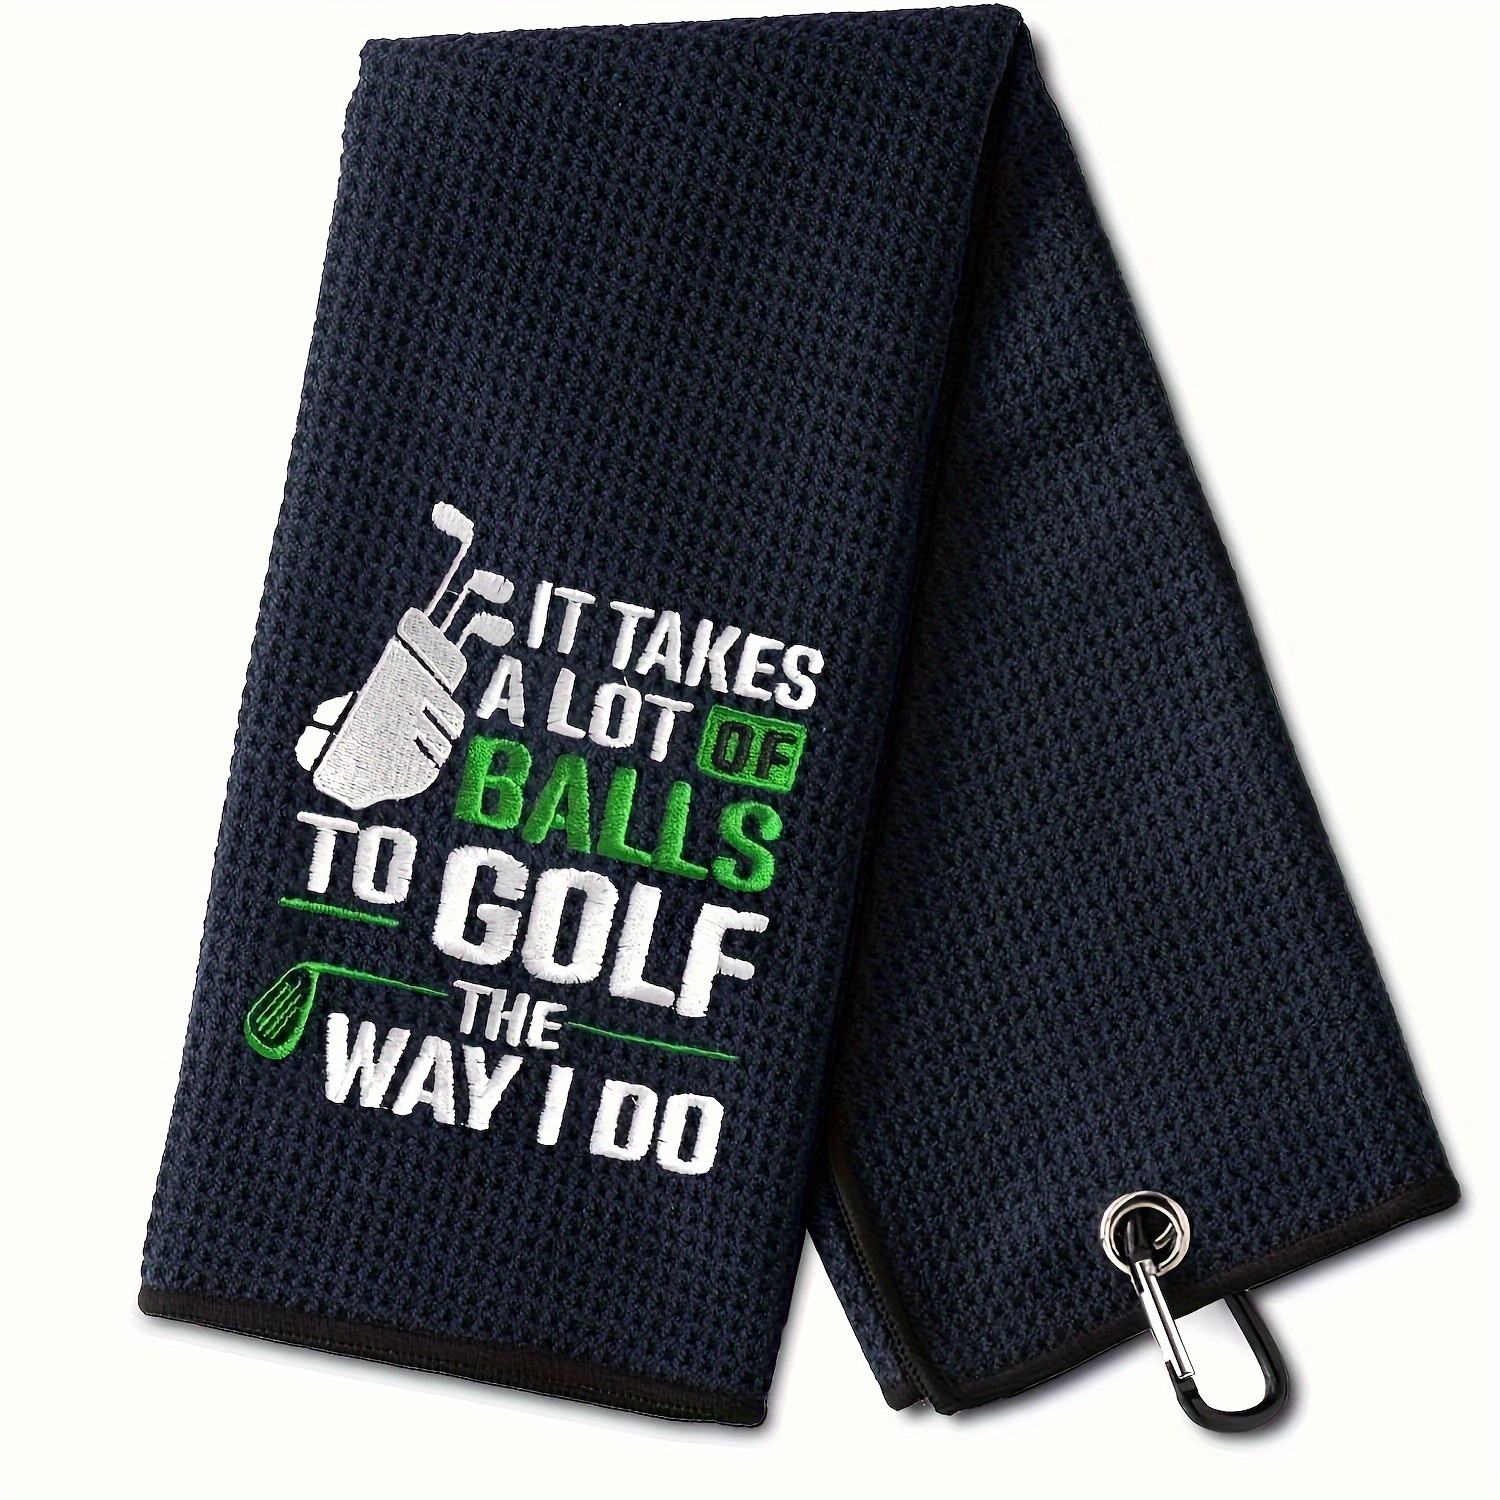 

It Takes A Lot Of Ball Funny Golf Towel, Embroidered Golf Towels For Golf Bags With Clip, Golf Accessories, Fathers Day Birthday Retirement Gifts For Golf Fan Dad